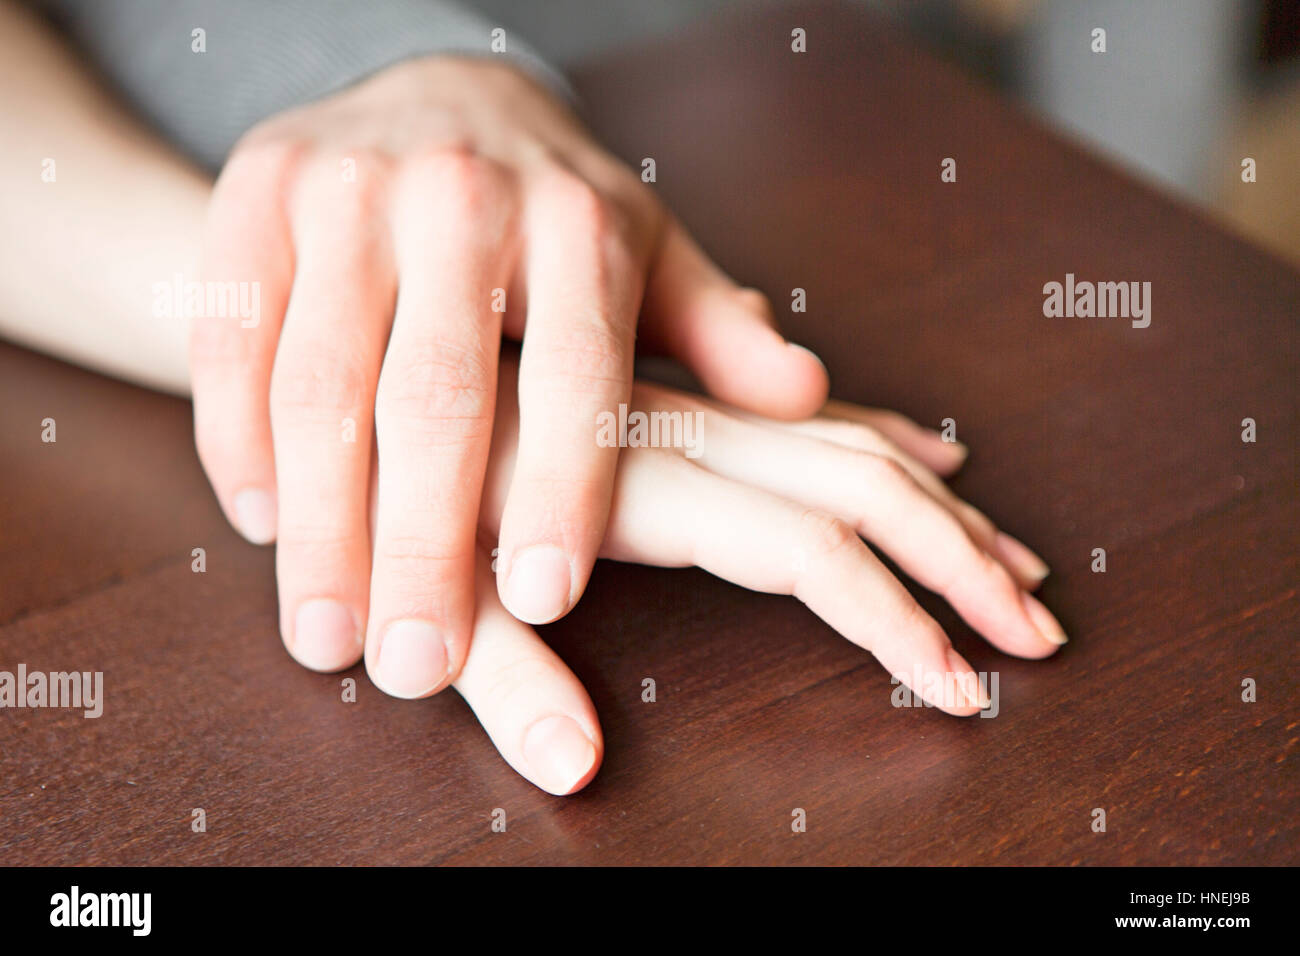 Couple aimant's hands on table Banque D'Images